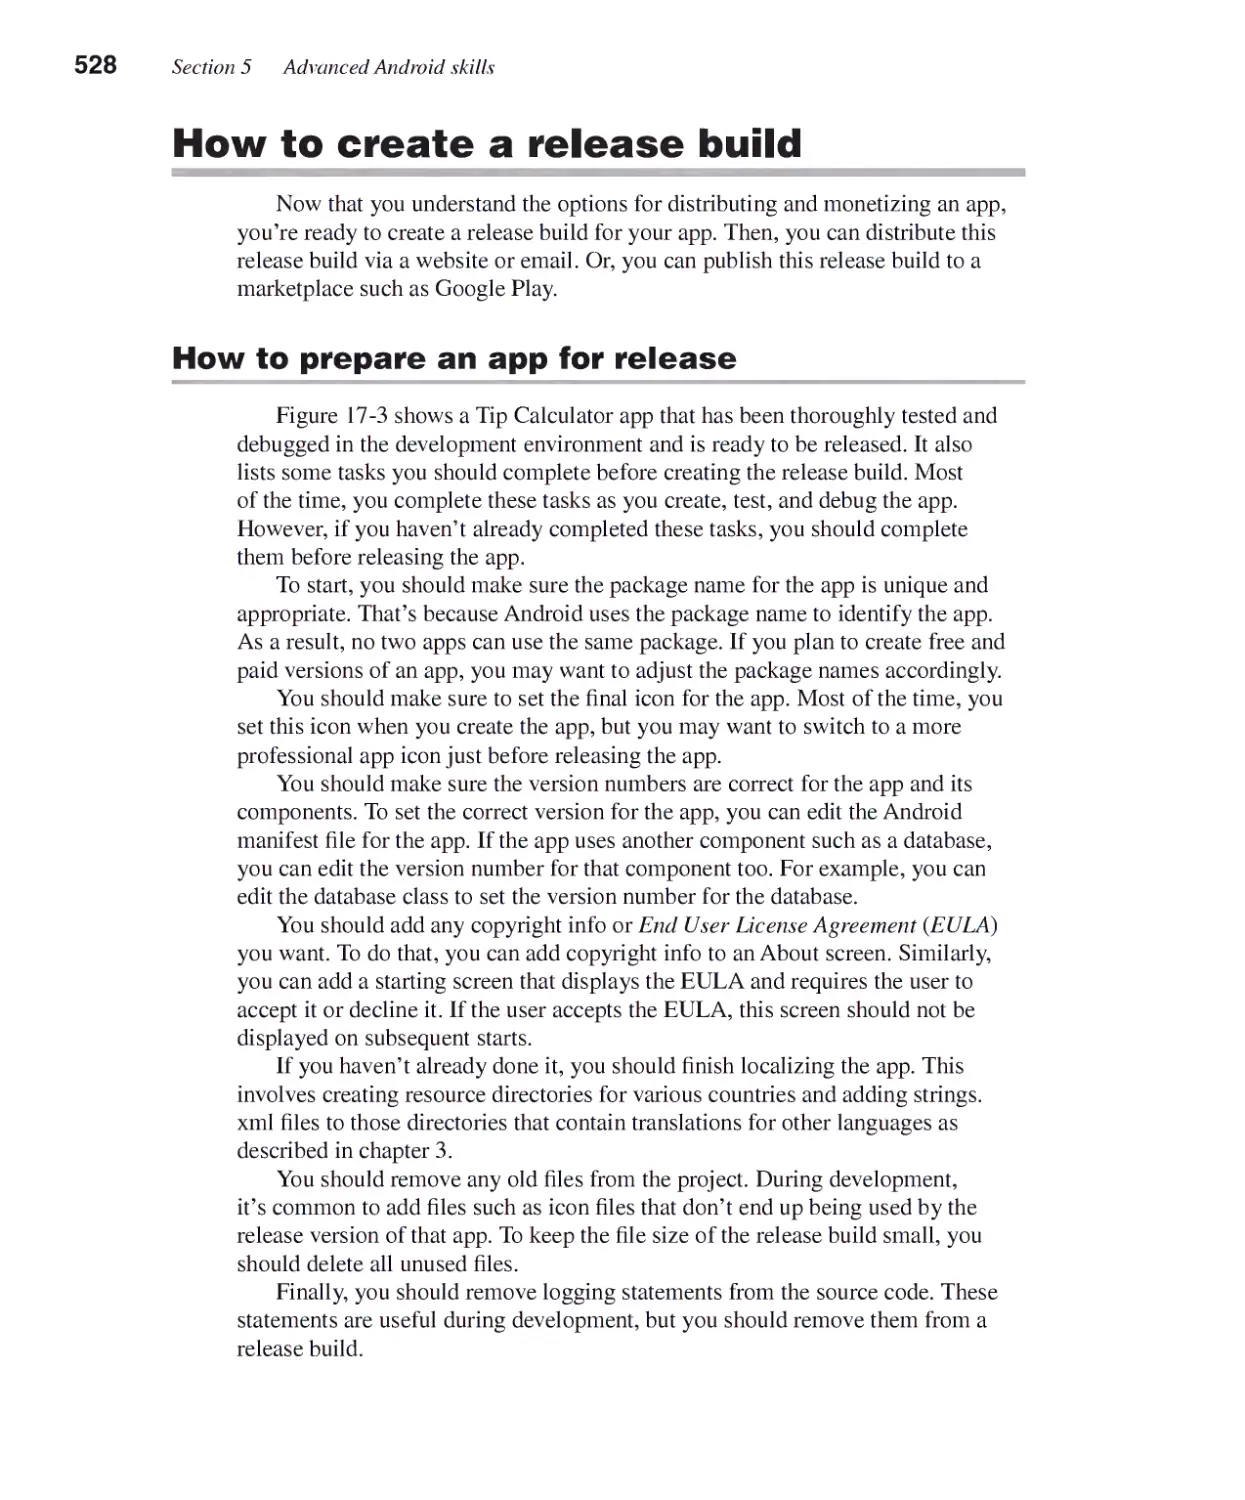 How to Create a Release Build